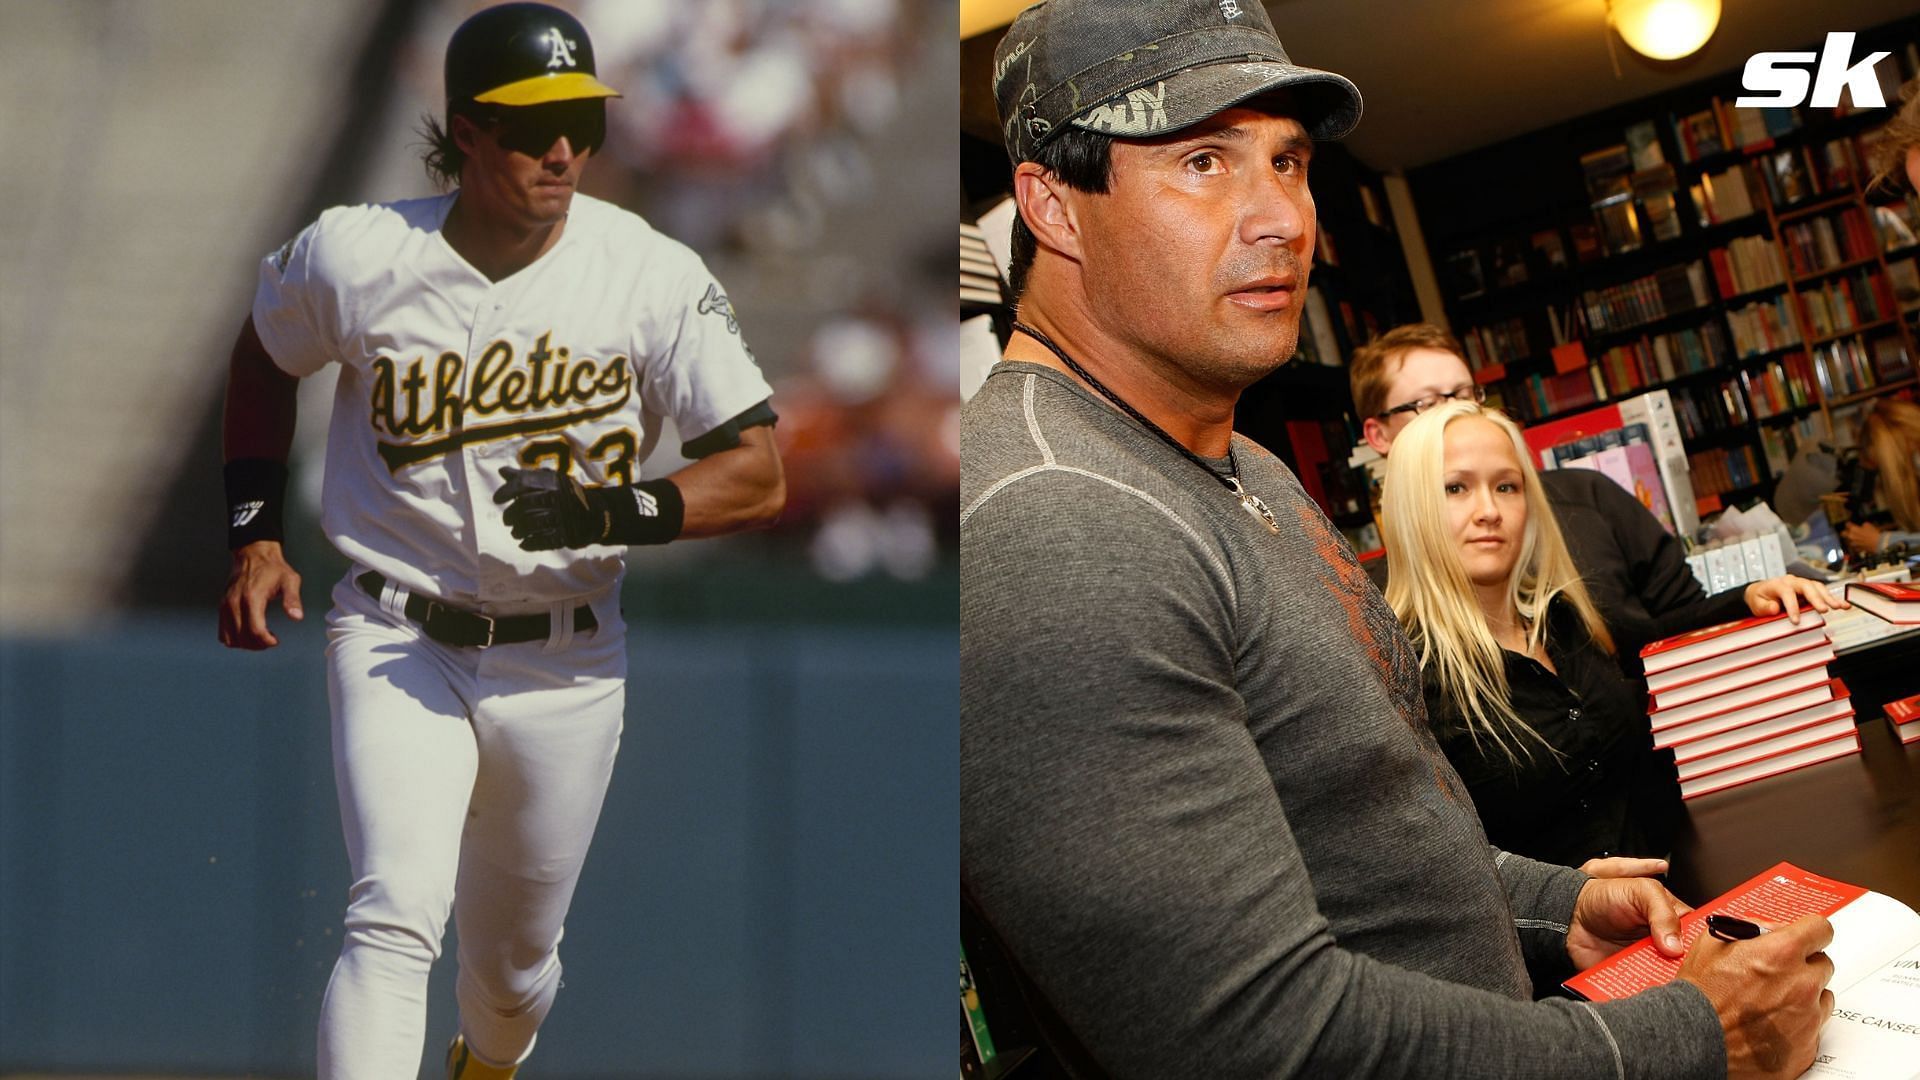 Former MVP Jose Canseco had to come up with some illustrious ways to counter money issues after retirement